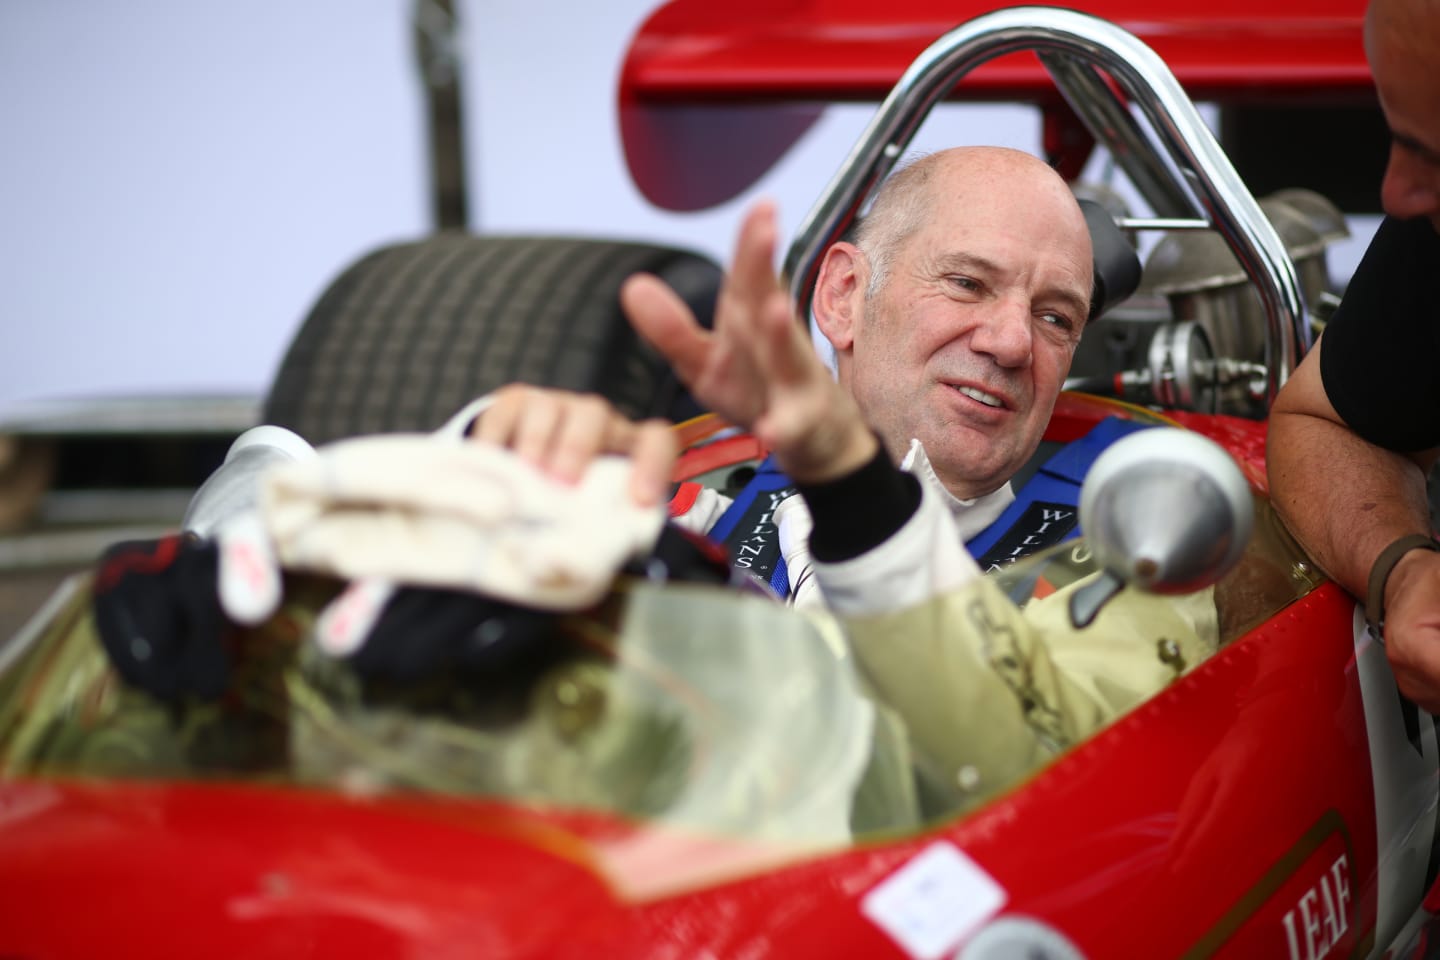 www.sutton-images.com Adrian Newey (GBR) Lotus 49B at Goodwood Festival of Speed, Goodwood, England, 30 June - 2 July 2017. © Sutton Images